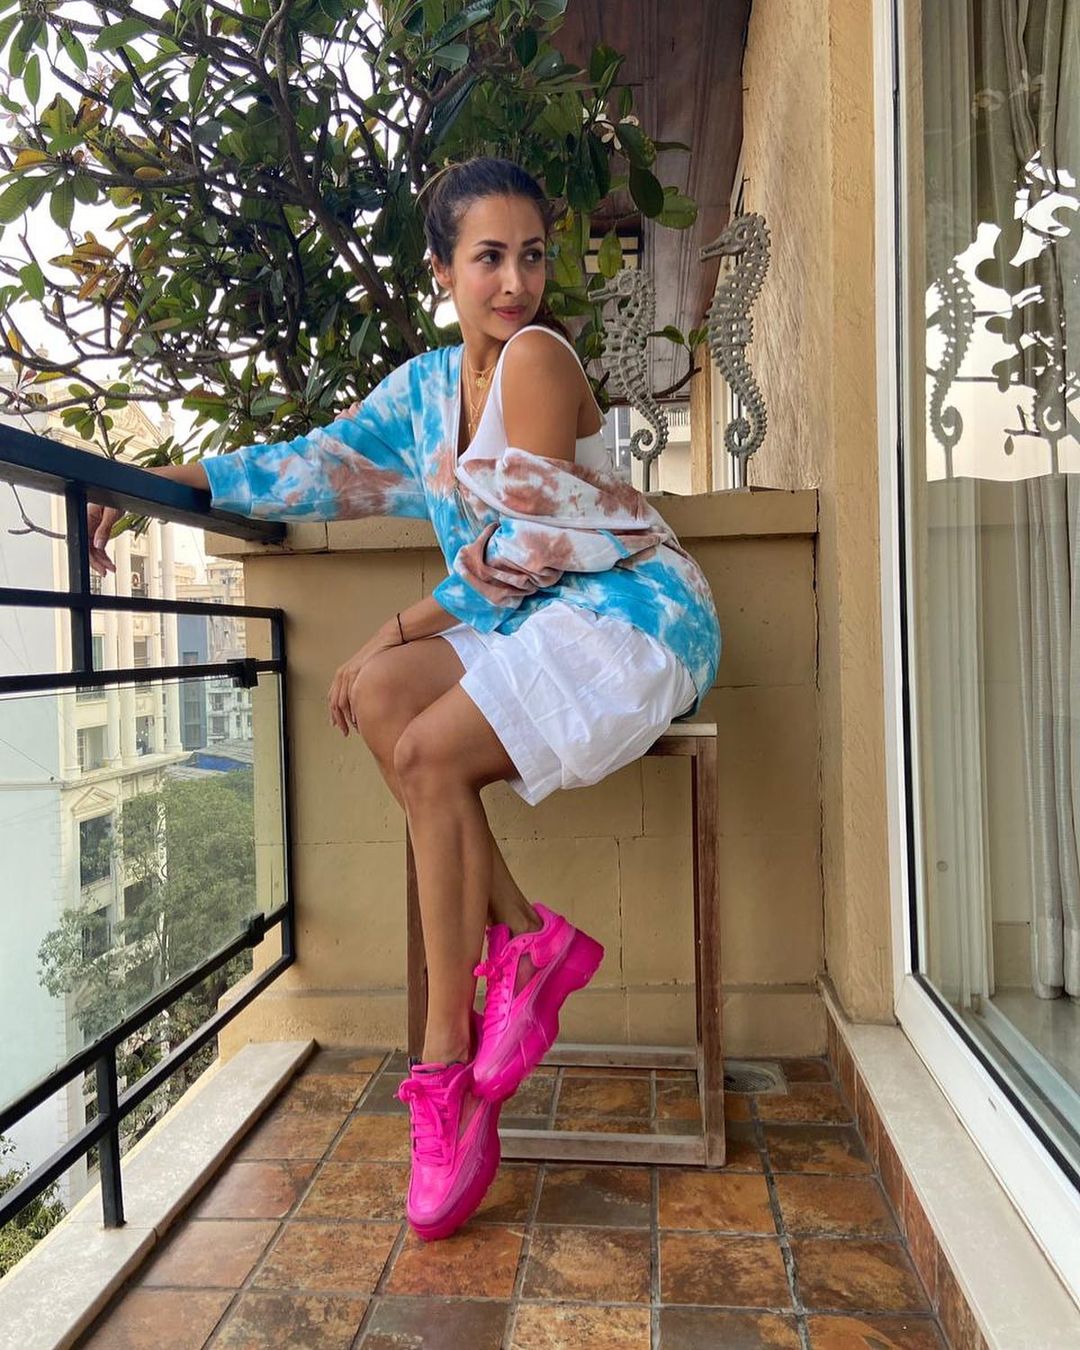 Chique Sport - Who else is as happy as Marney to be back in the rink? ​  ​Marney is head to toe in pink Inspire! Shop her look at chiquesport.com  #ChiqueSport